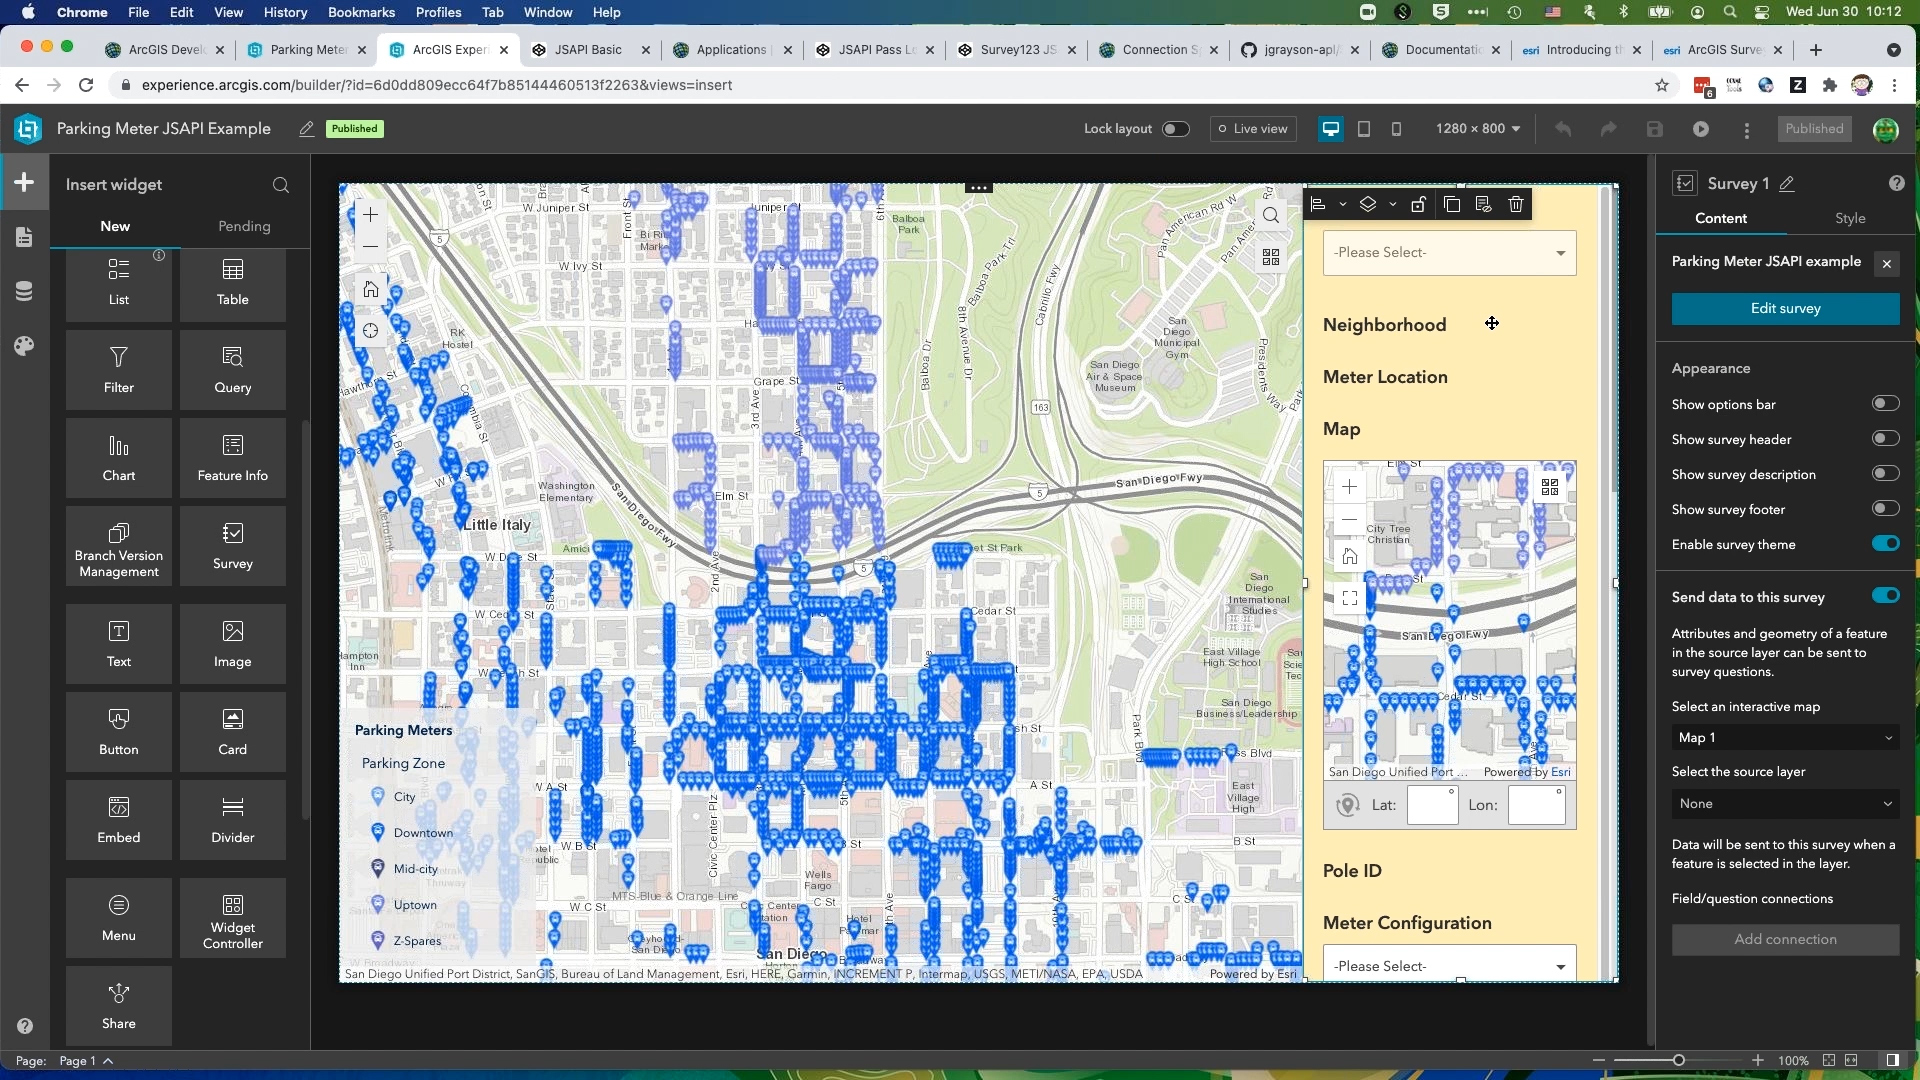 A screenshot of an ArcGIS Experience Builder dashboard displaying a navigation bar on the left, a light map with multiple blue and light purple icons overlaying it in the center, and a configuration bar on the right